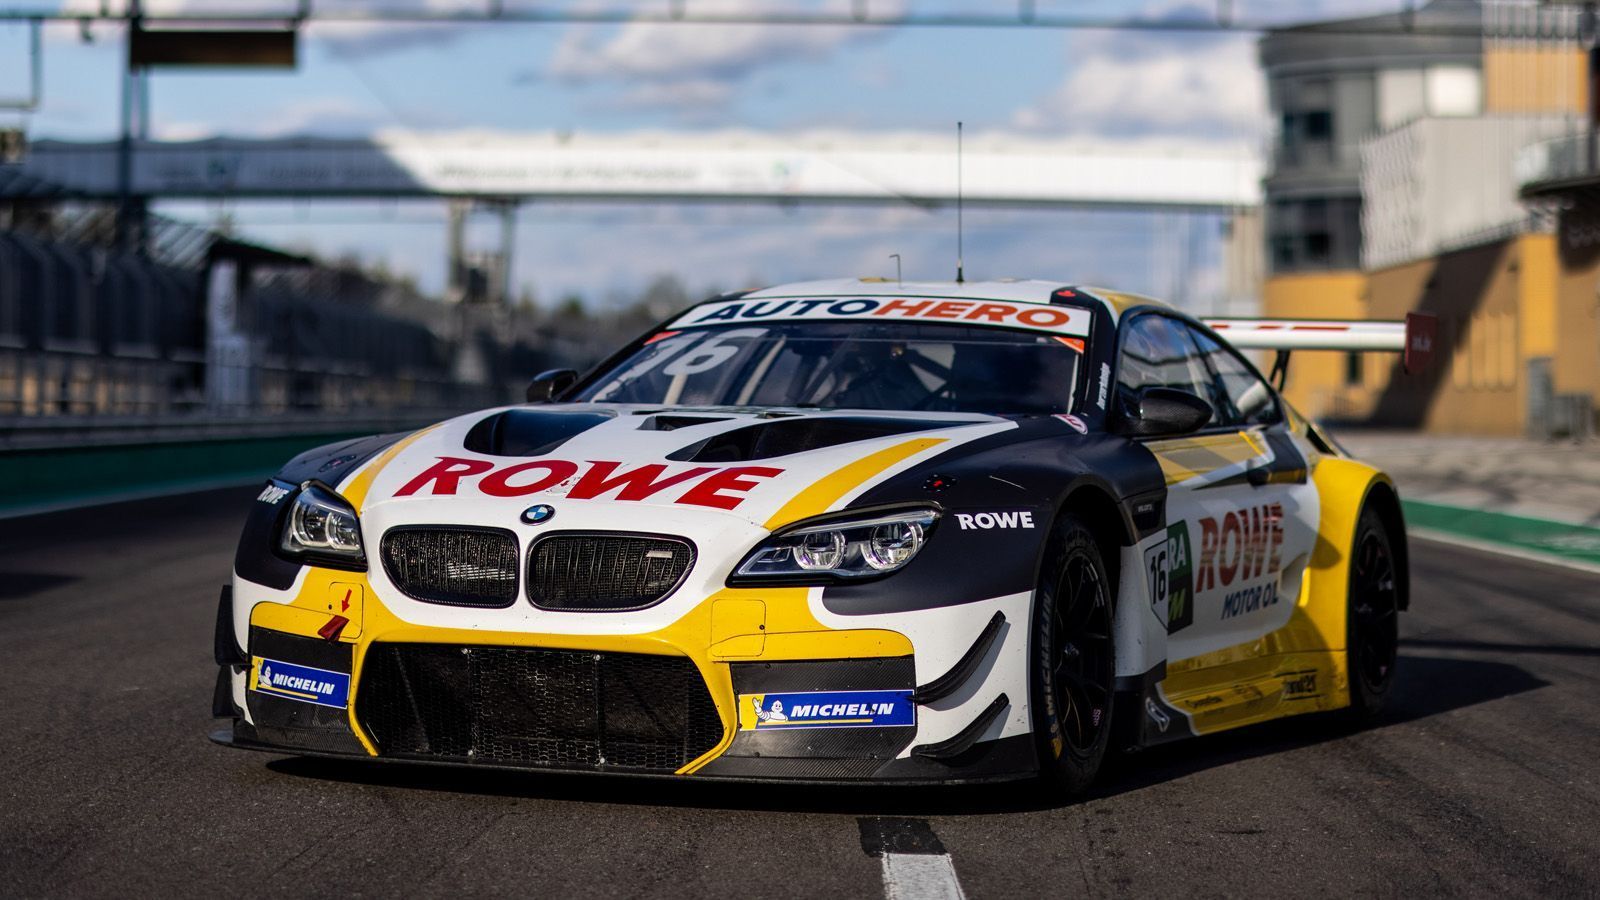 
                <strong>Rowe Racing (Timo Glock)</strong><br>
                &#x2022; Startnummer: 16 -<br>&#x2022; Auto: BMW M6 GT3<br>
              